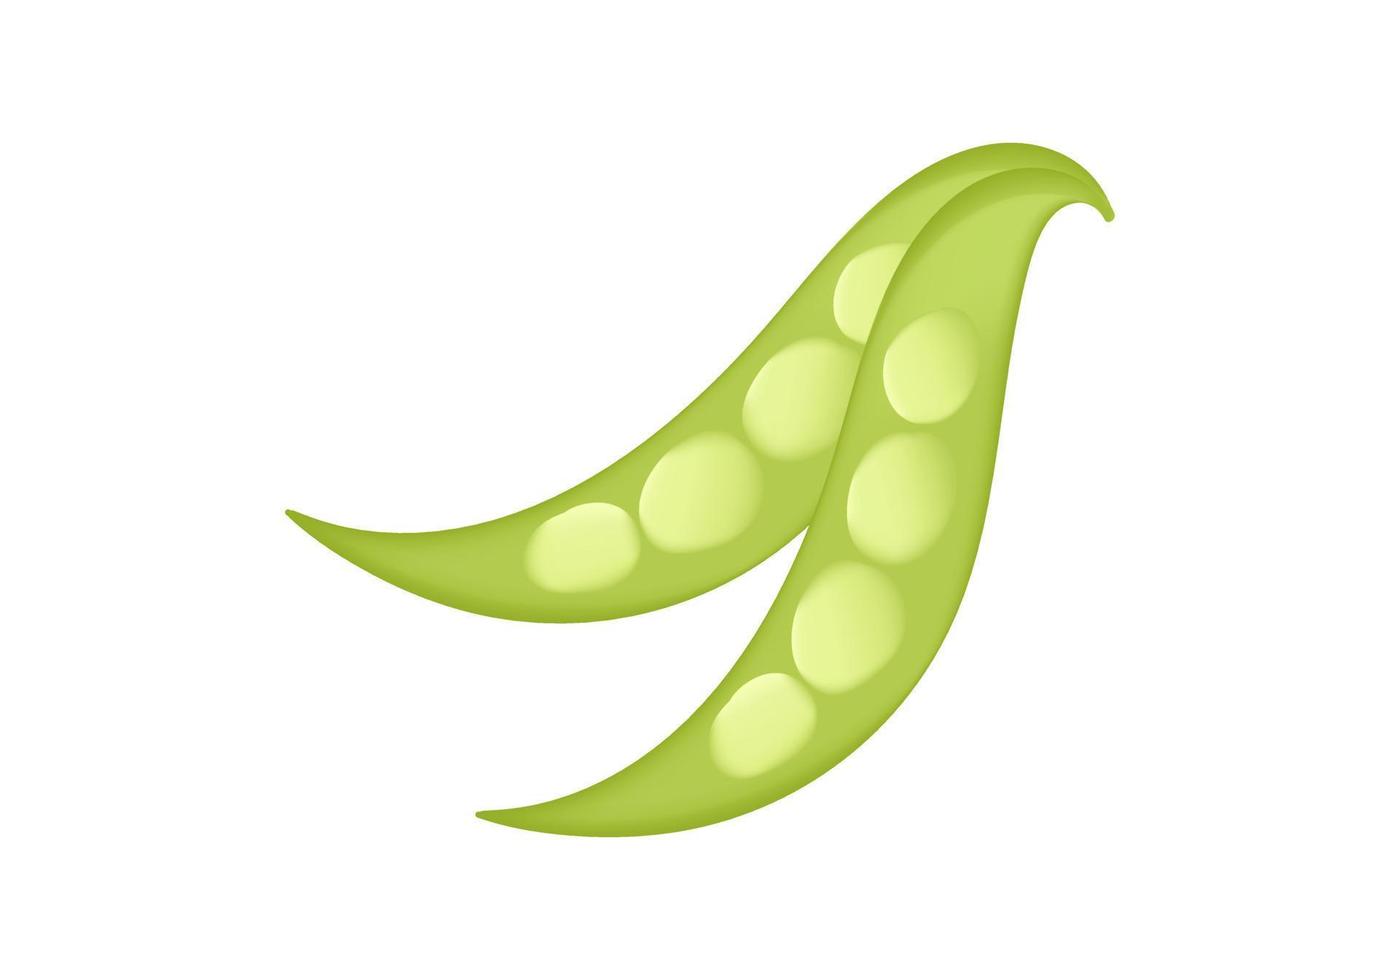 illustration of peas vegetable with mesh technique vector